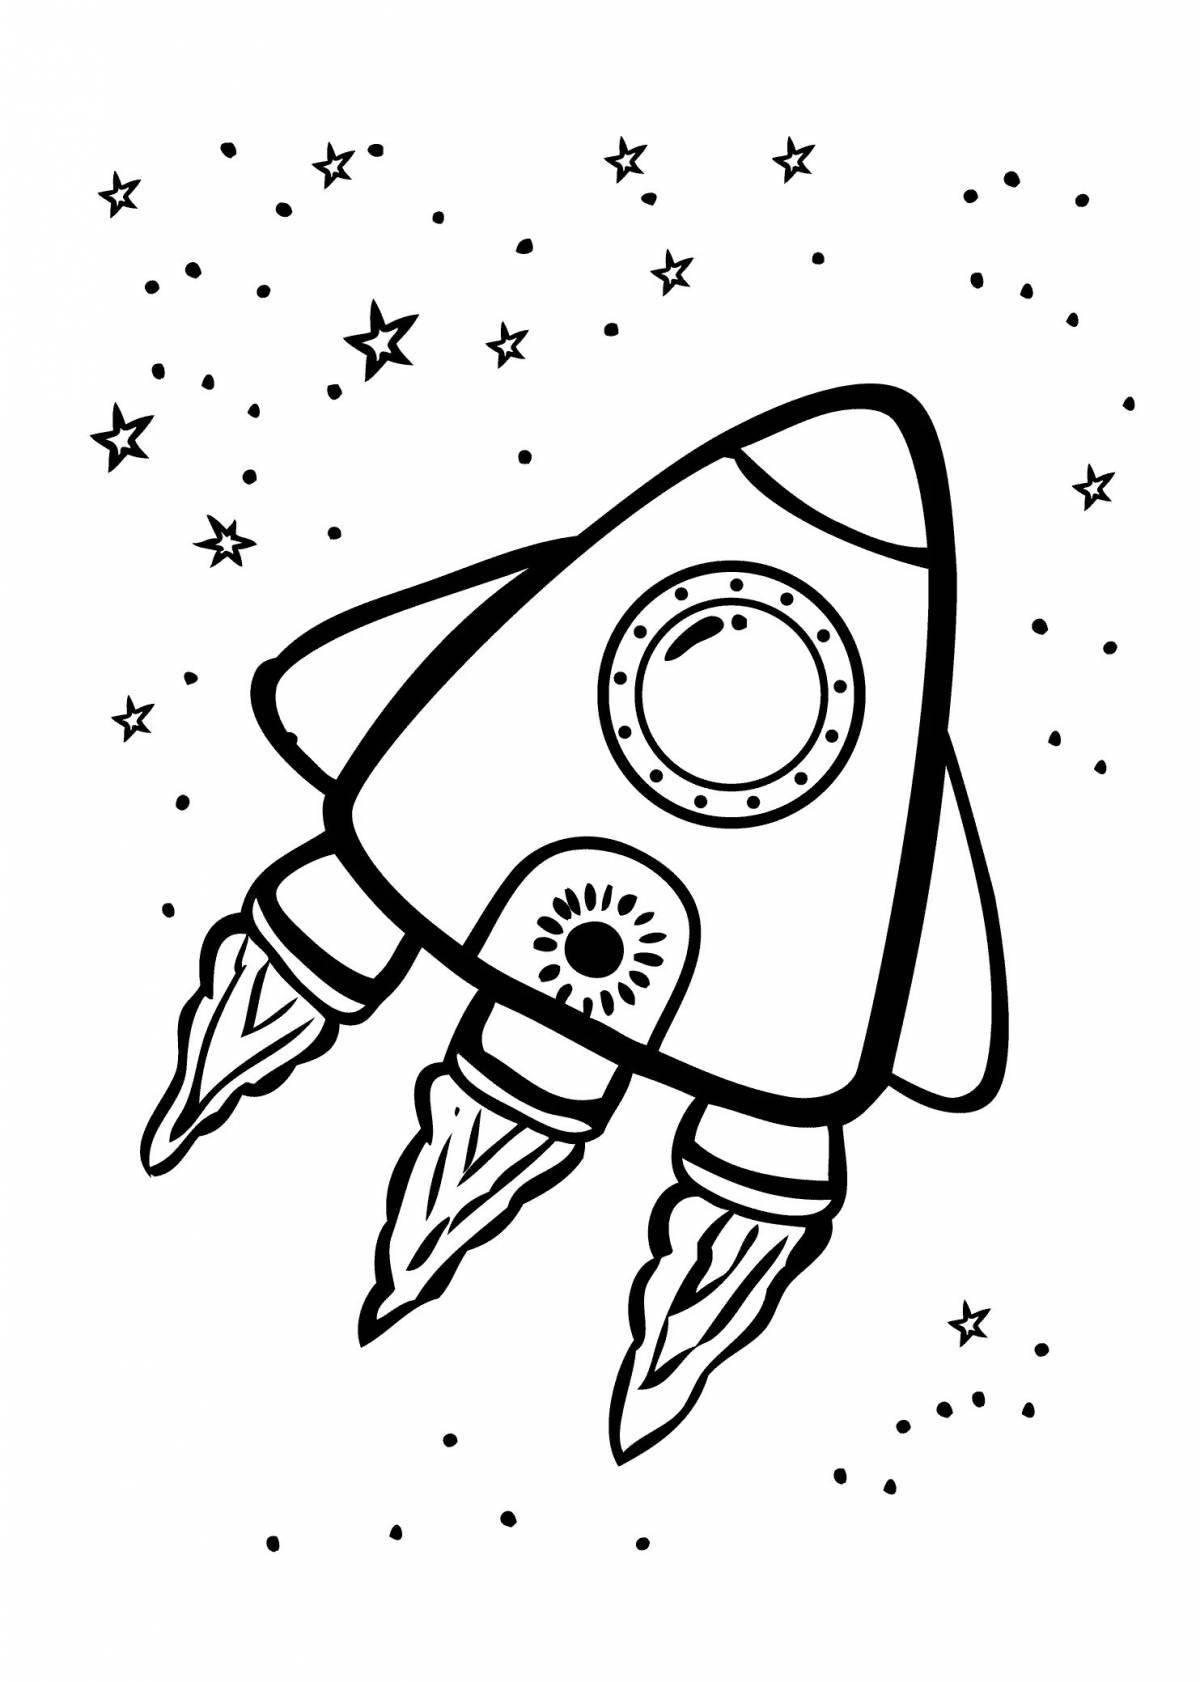 Playful rockets in space for kids